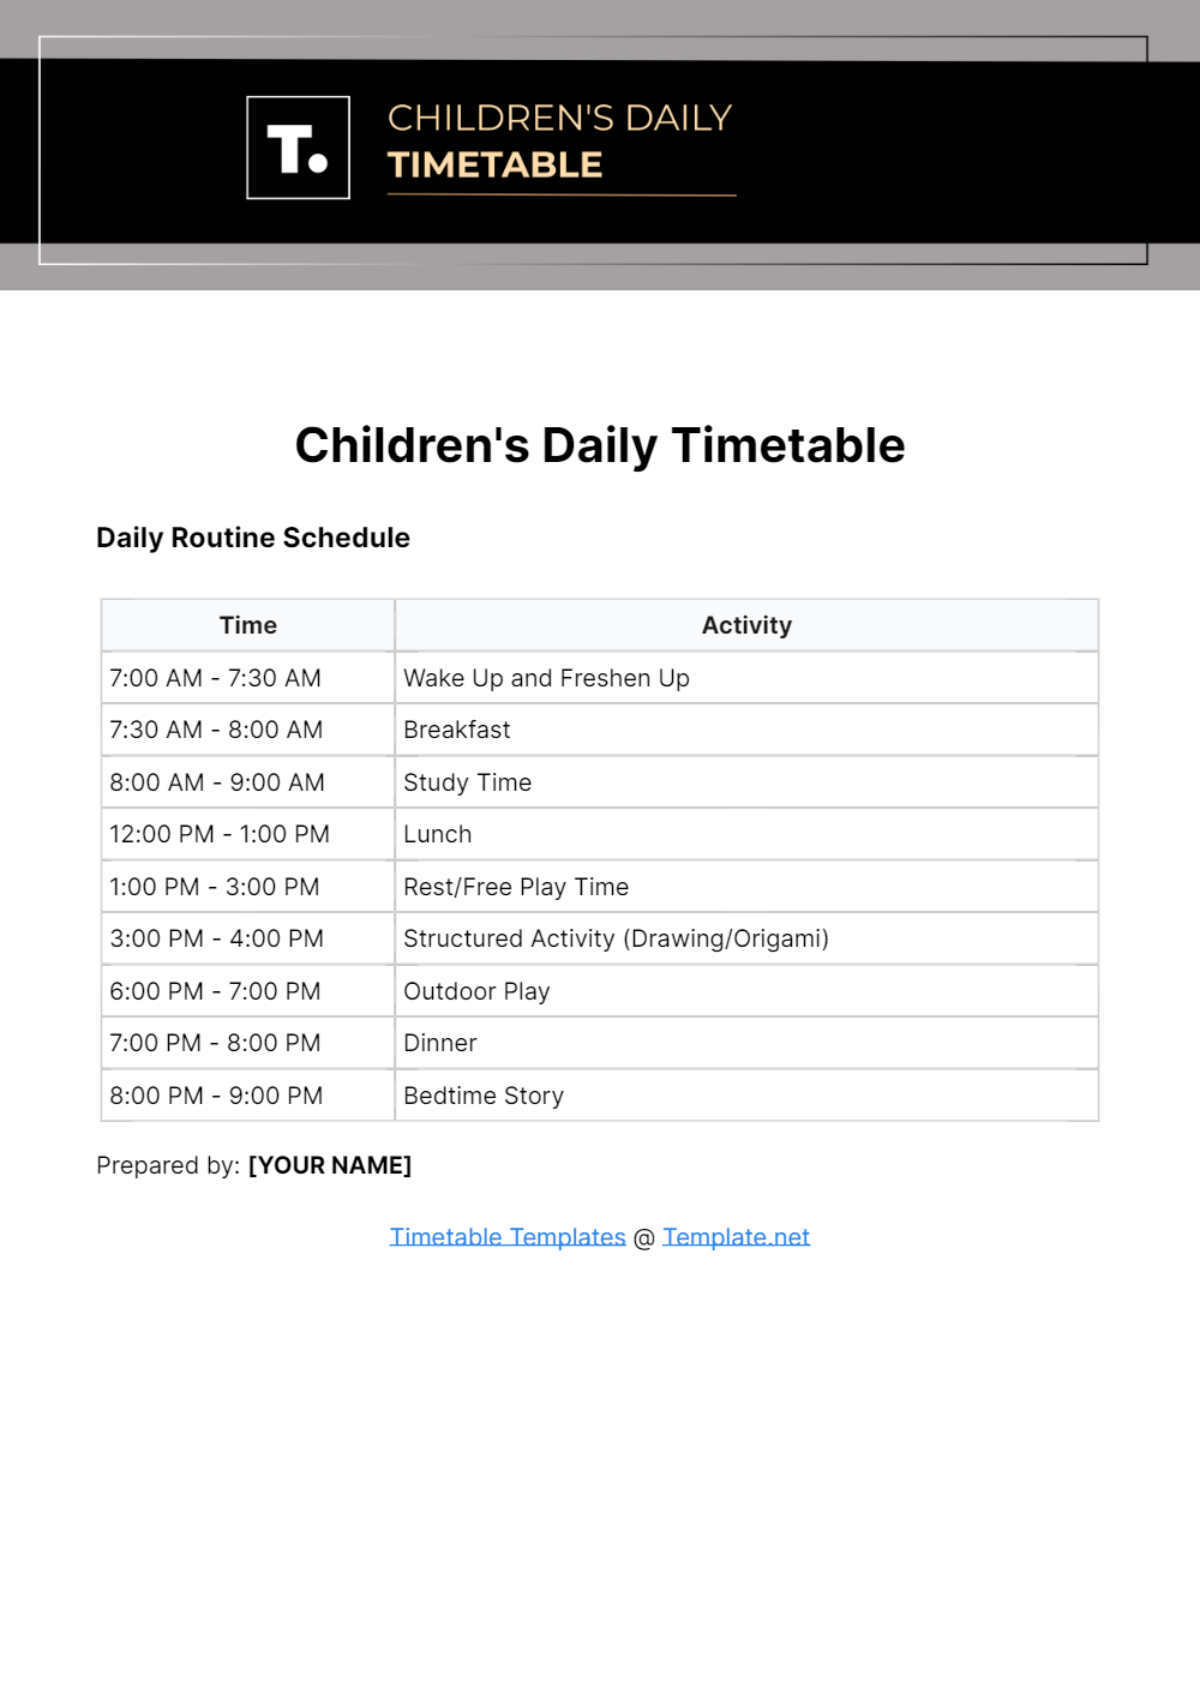 Free Children's Daily Timetable Template